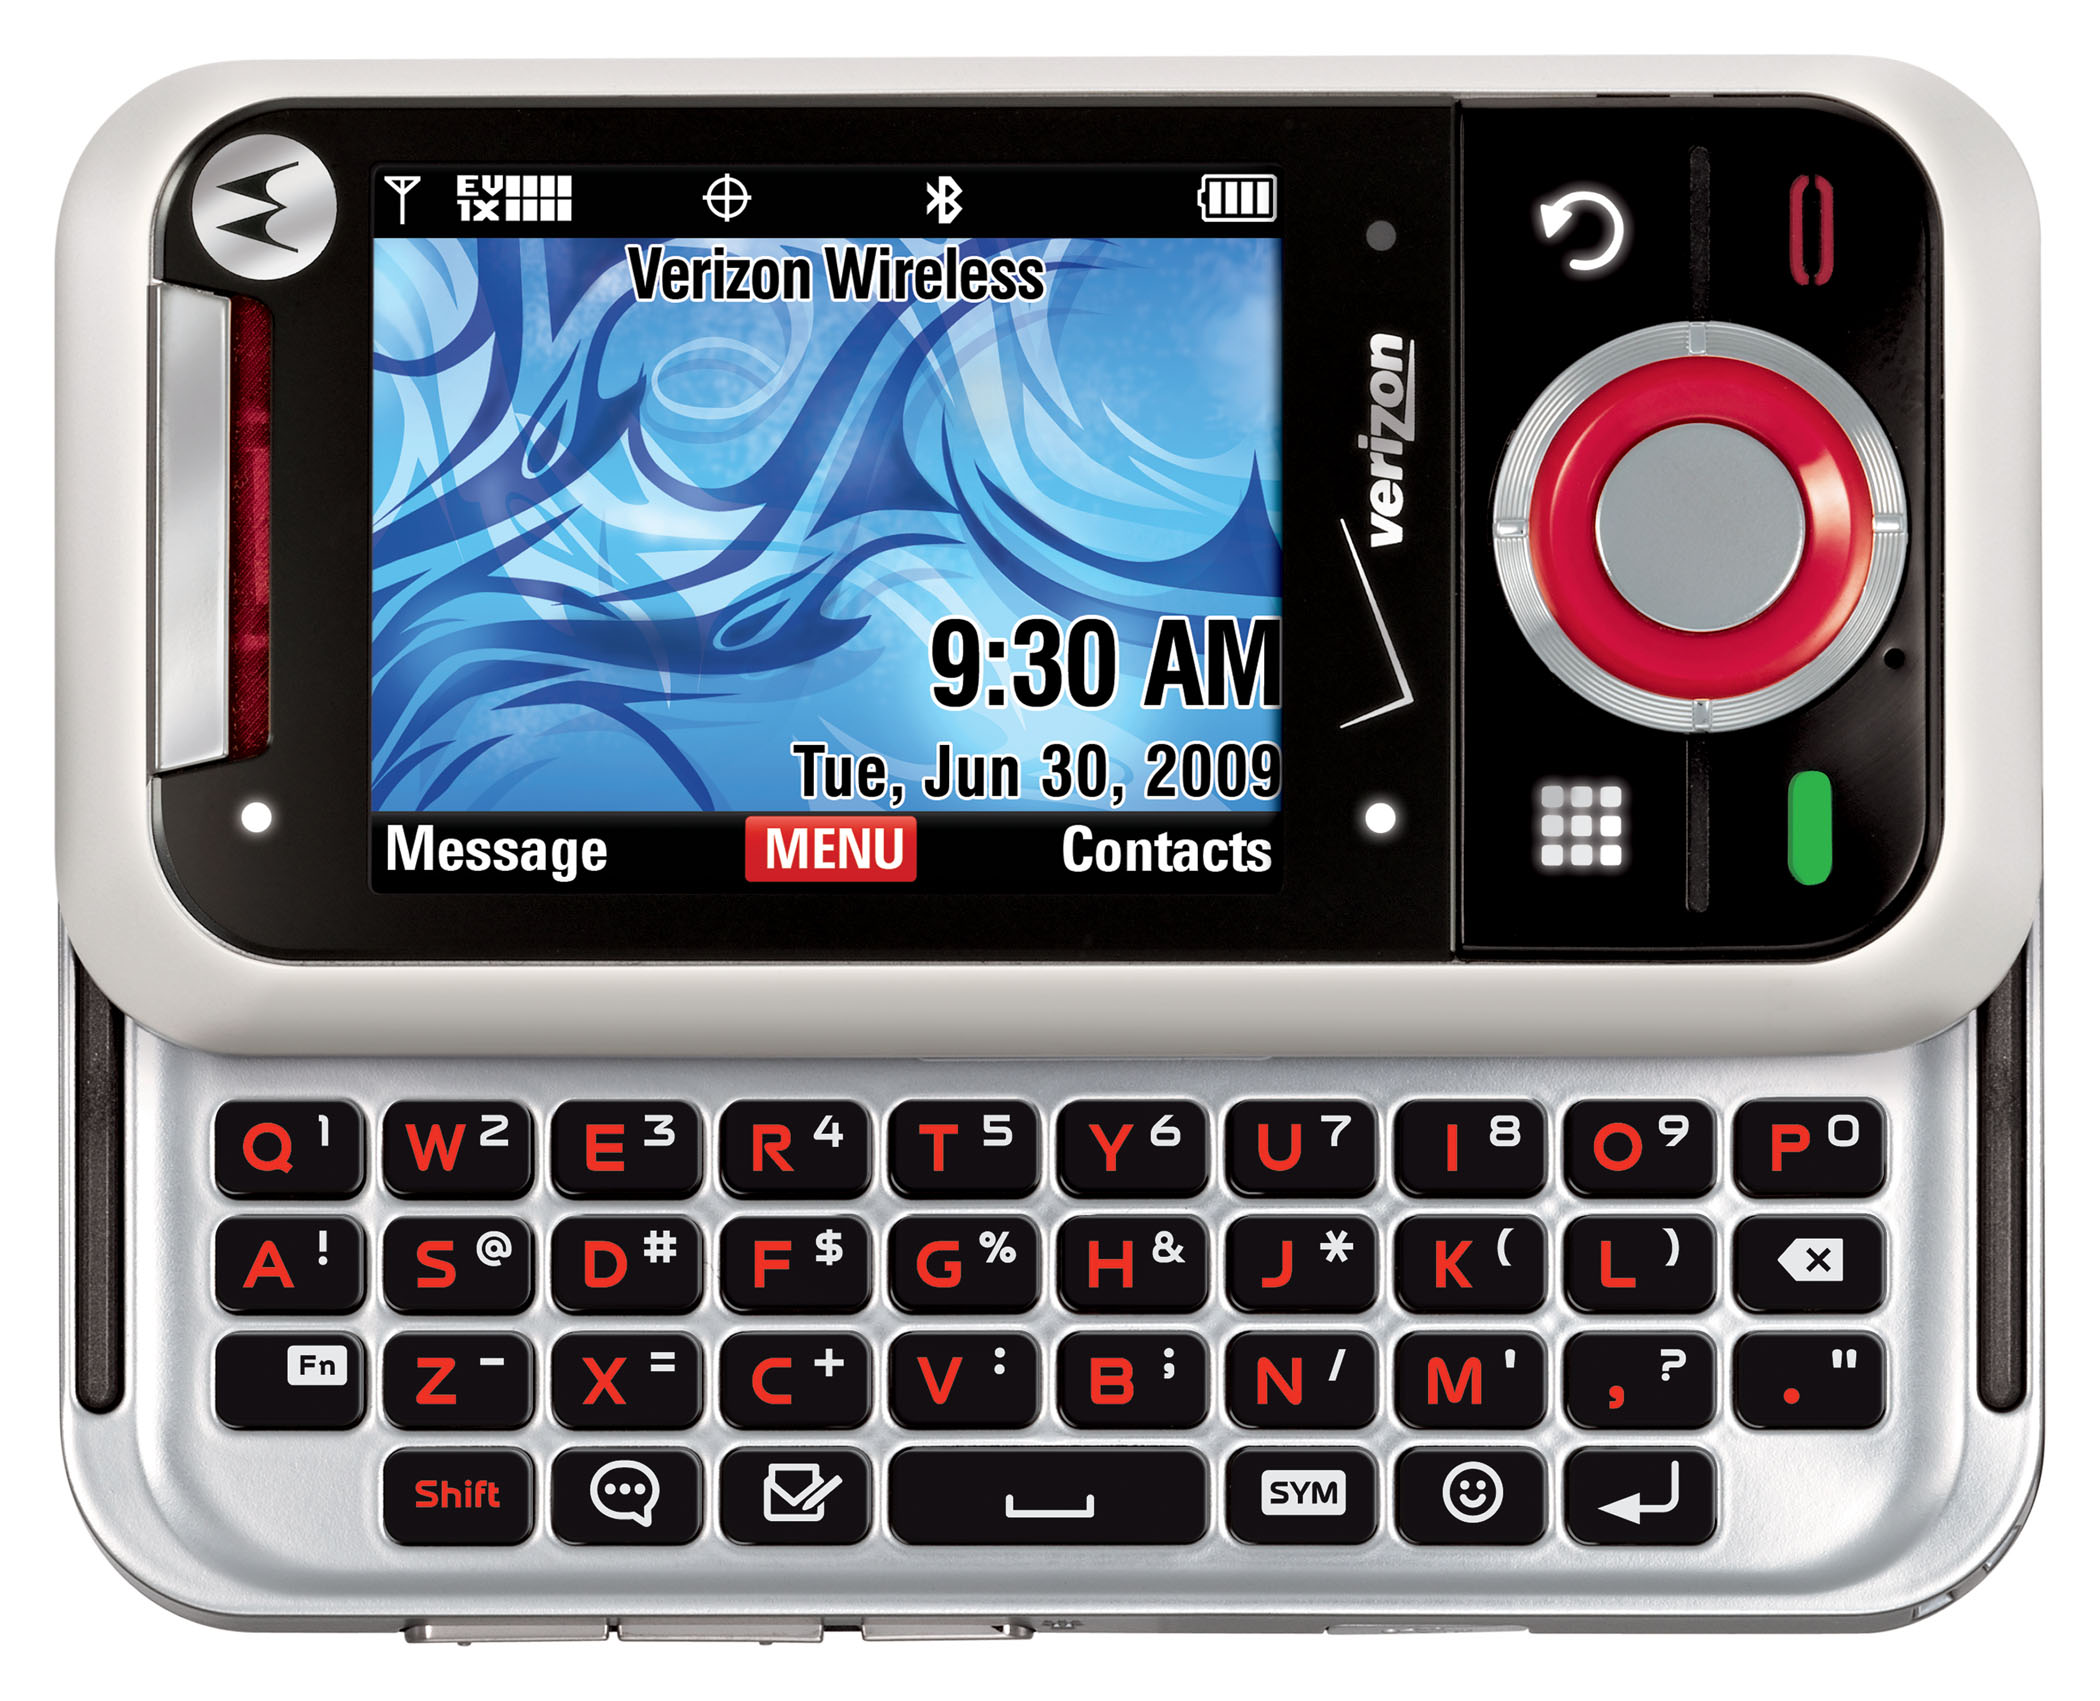 Motorola Rival messaging phone offers QWERTY, touch